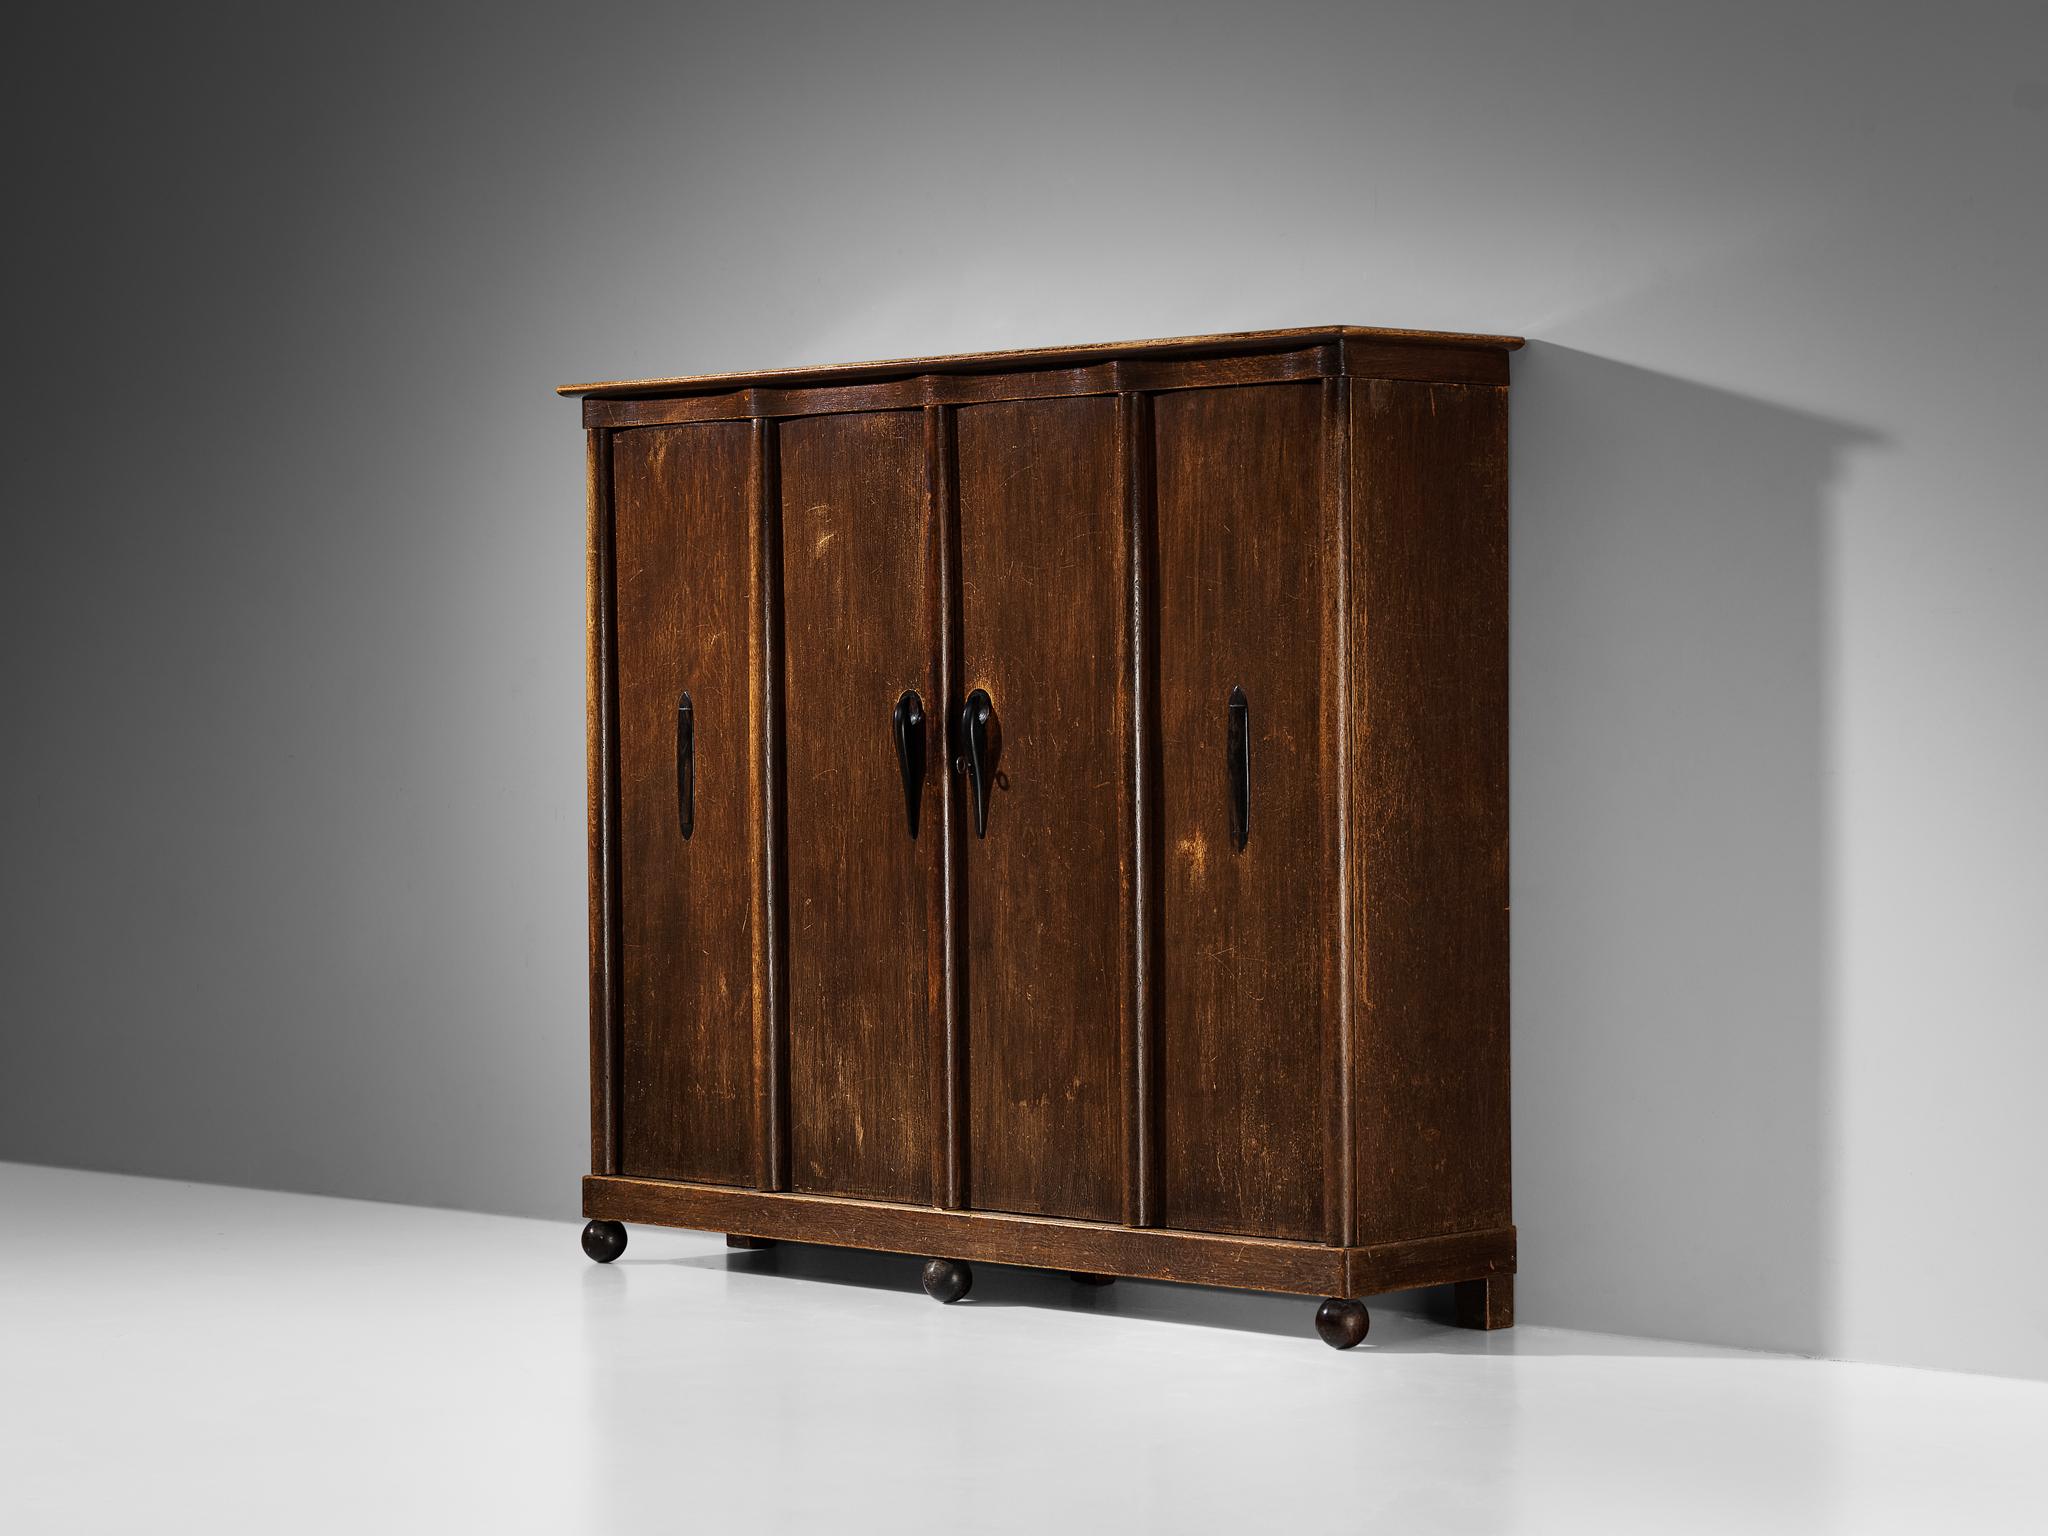 Willem Penaat, sideboard, oak, The Netherlands, early 1920s

Made in the early 1920s, this delightful sideboard is designed by the Dutch interior designer Willem Penaat (1875-1957). Before 1925, A large part of his work was influenced by the